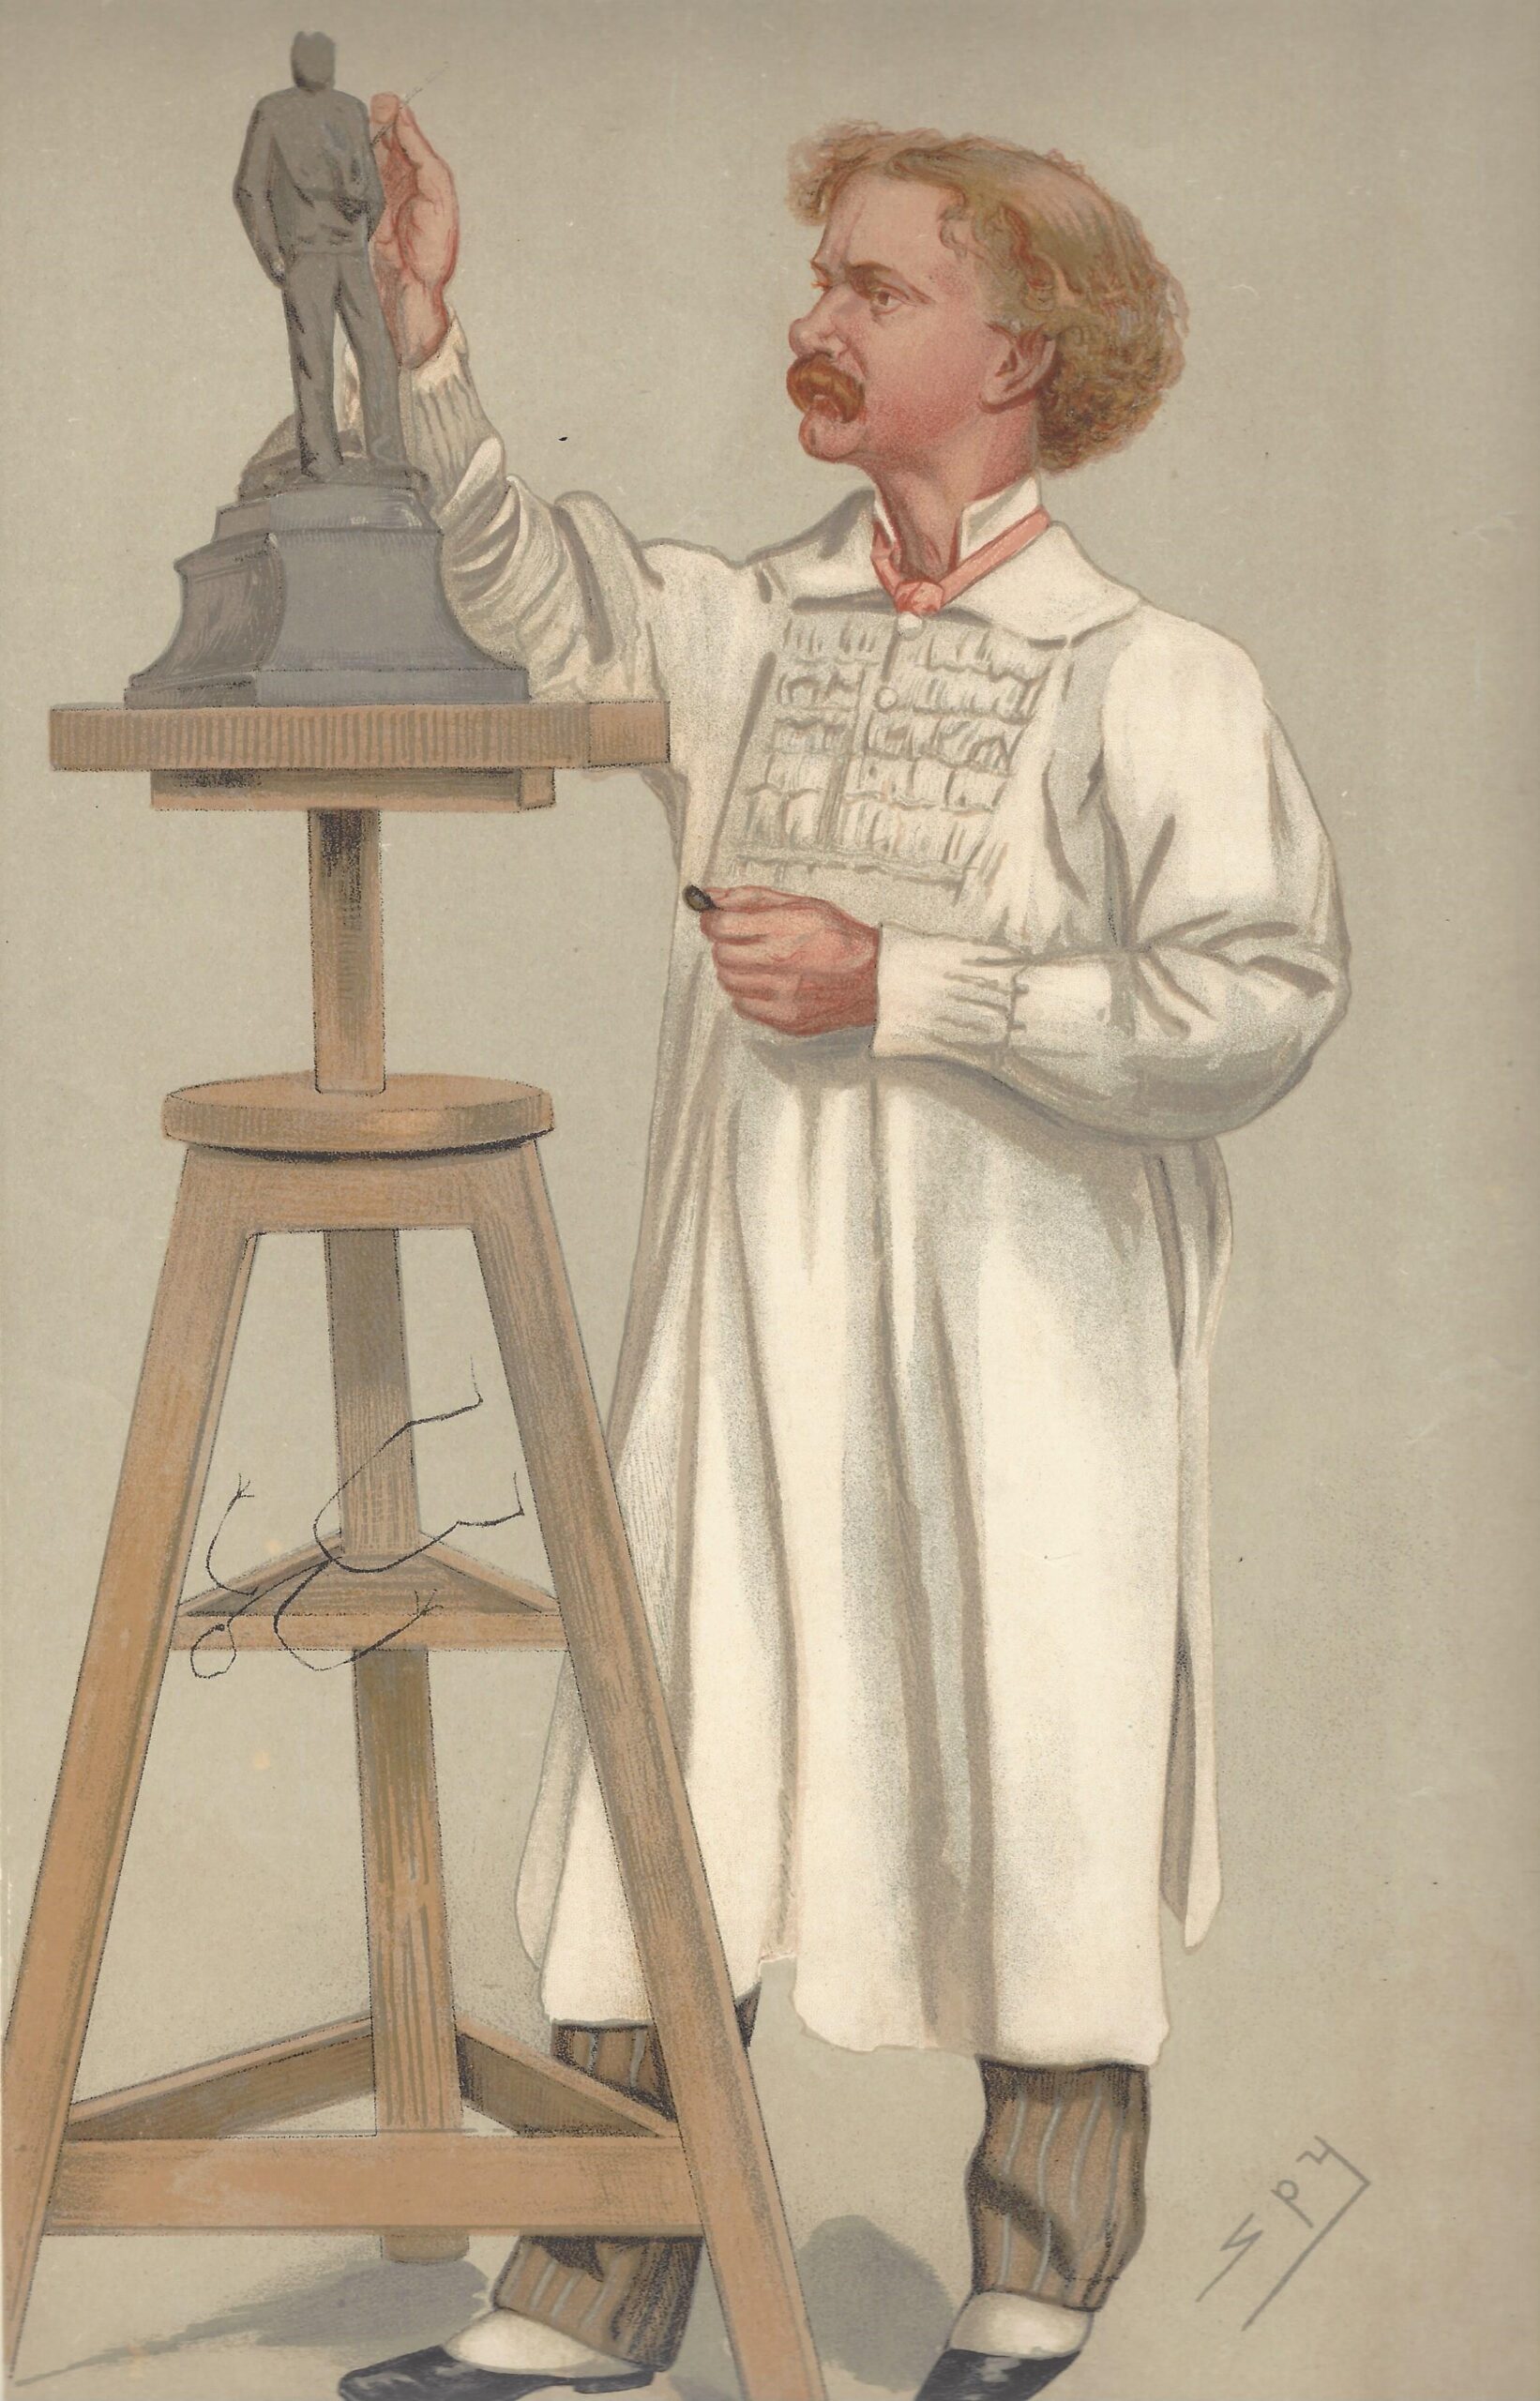 The Evolution of 19th Century Artist Smocks: A Glimpse into the Fashion of Artistic Expression